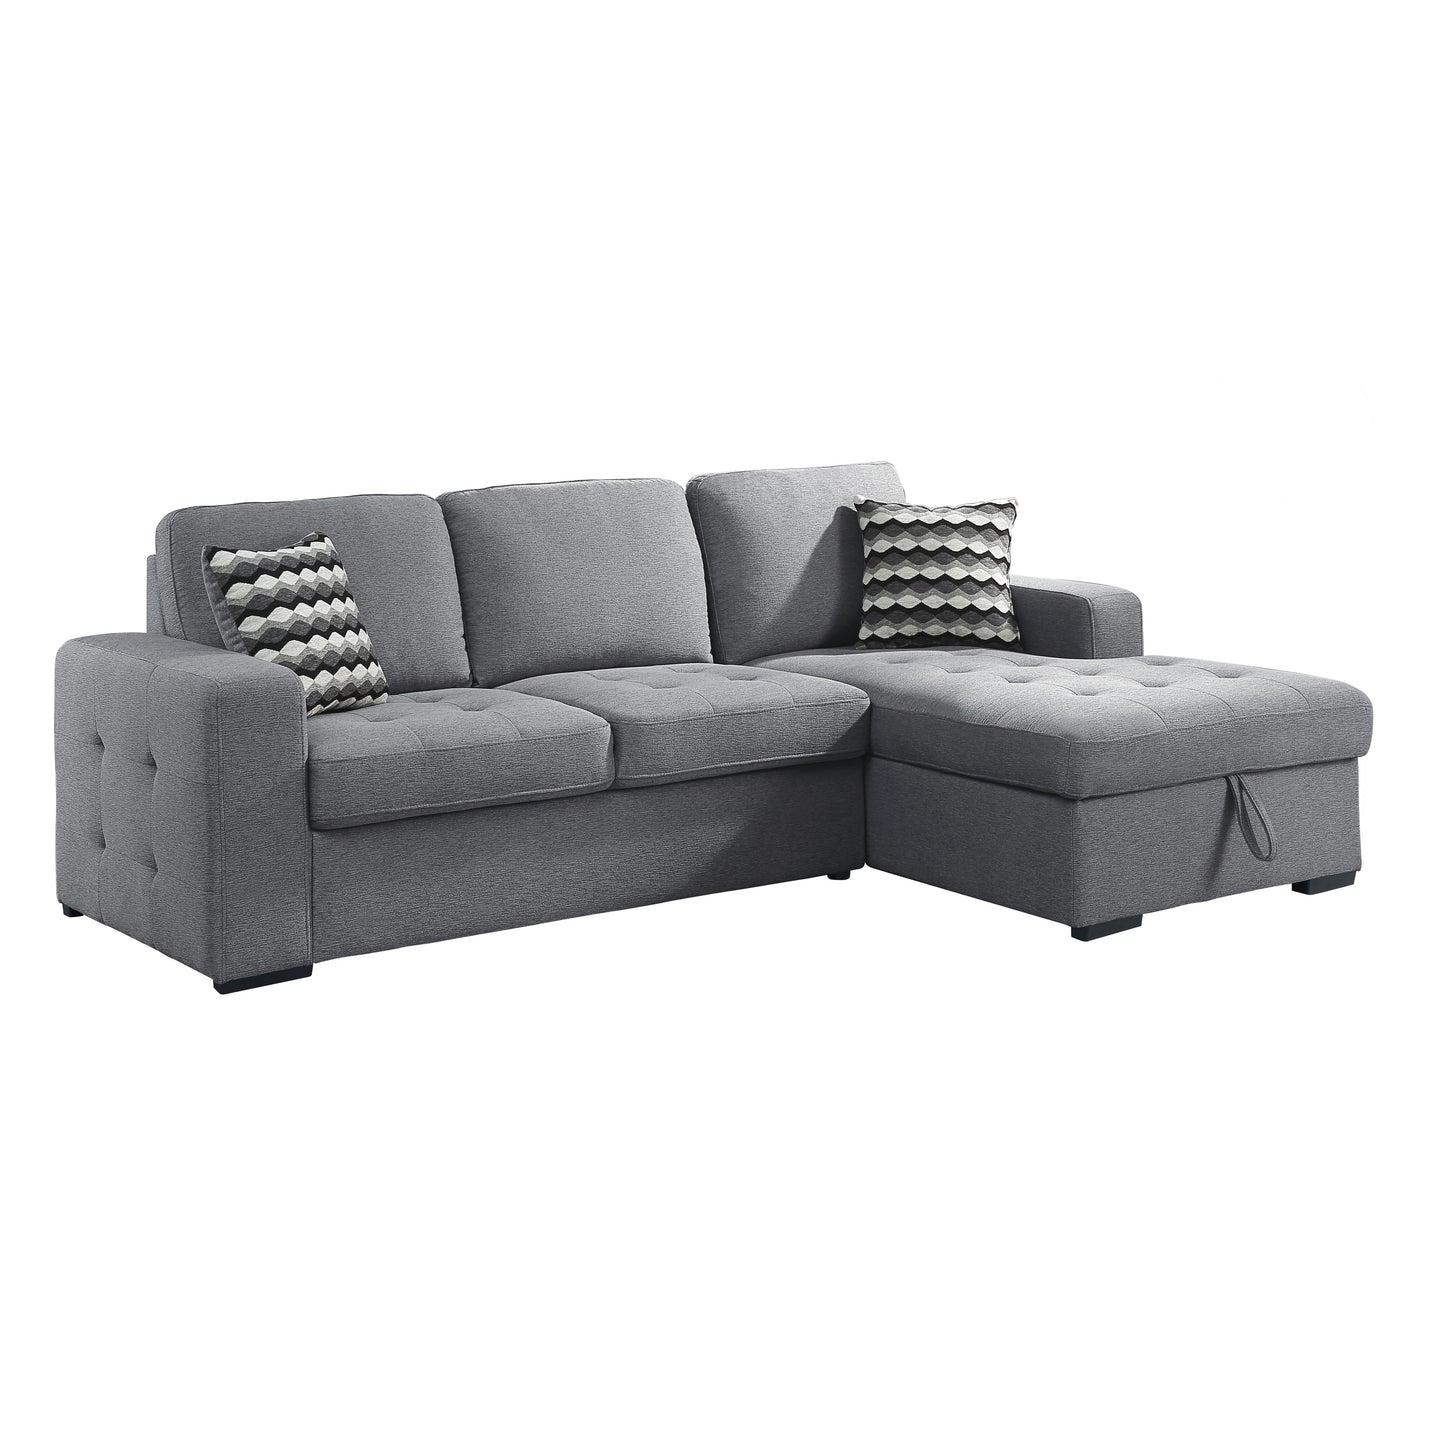 Soloman 2-Piece Sectional W/ Hidden Storage & Right Chaise Only